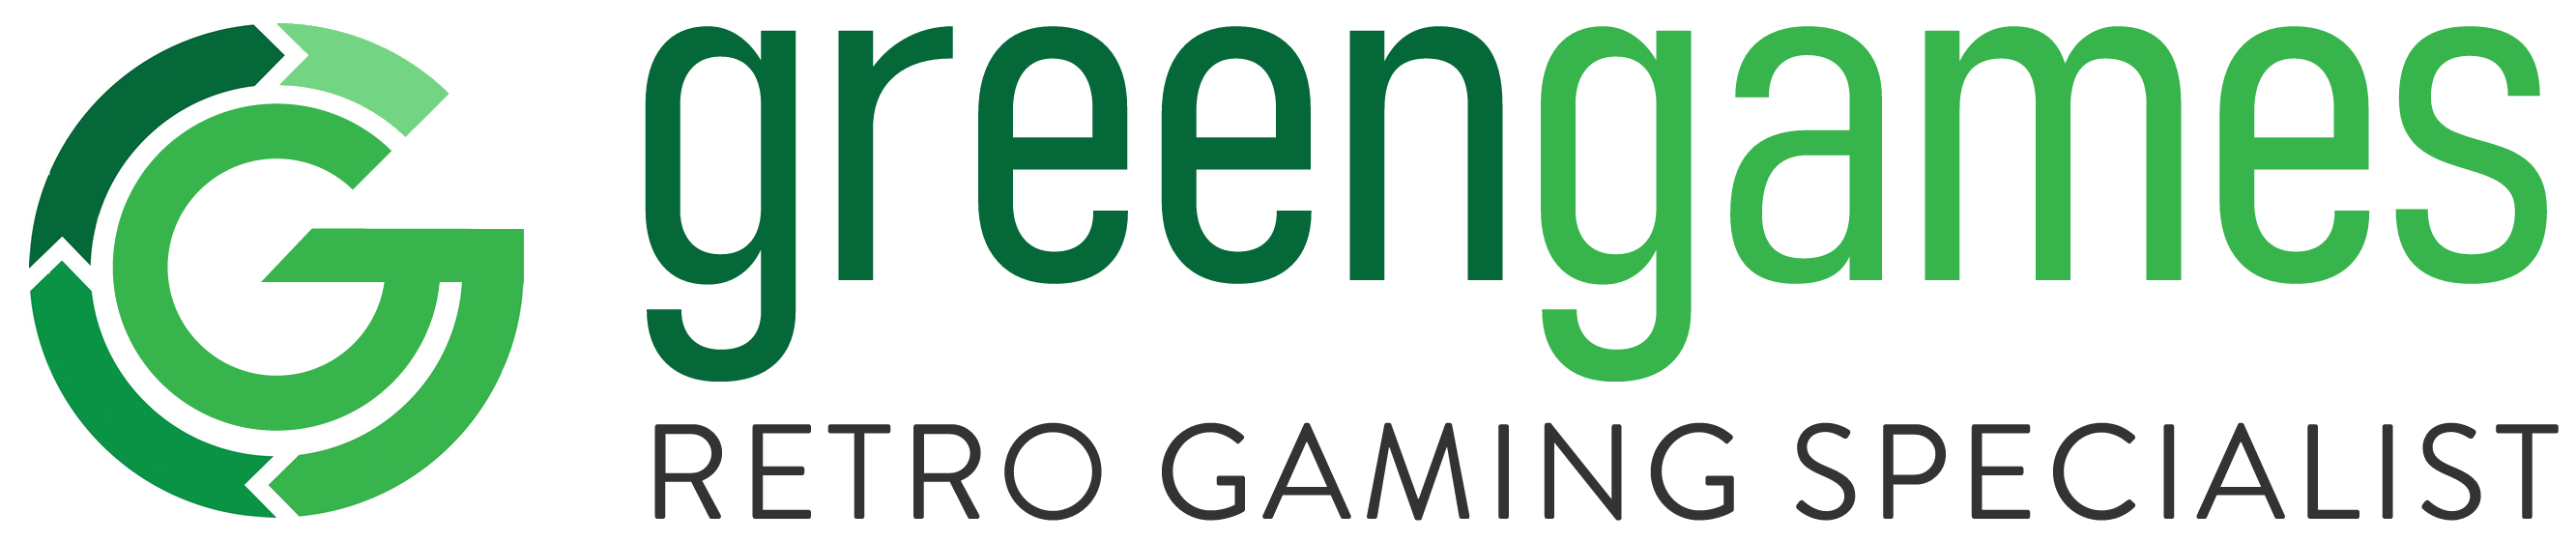 Green Games - Retro Gaming Specialist